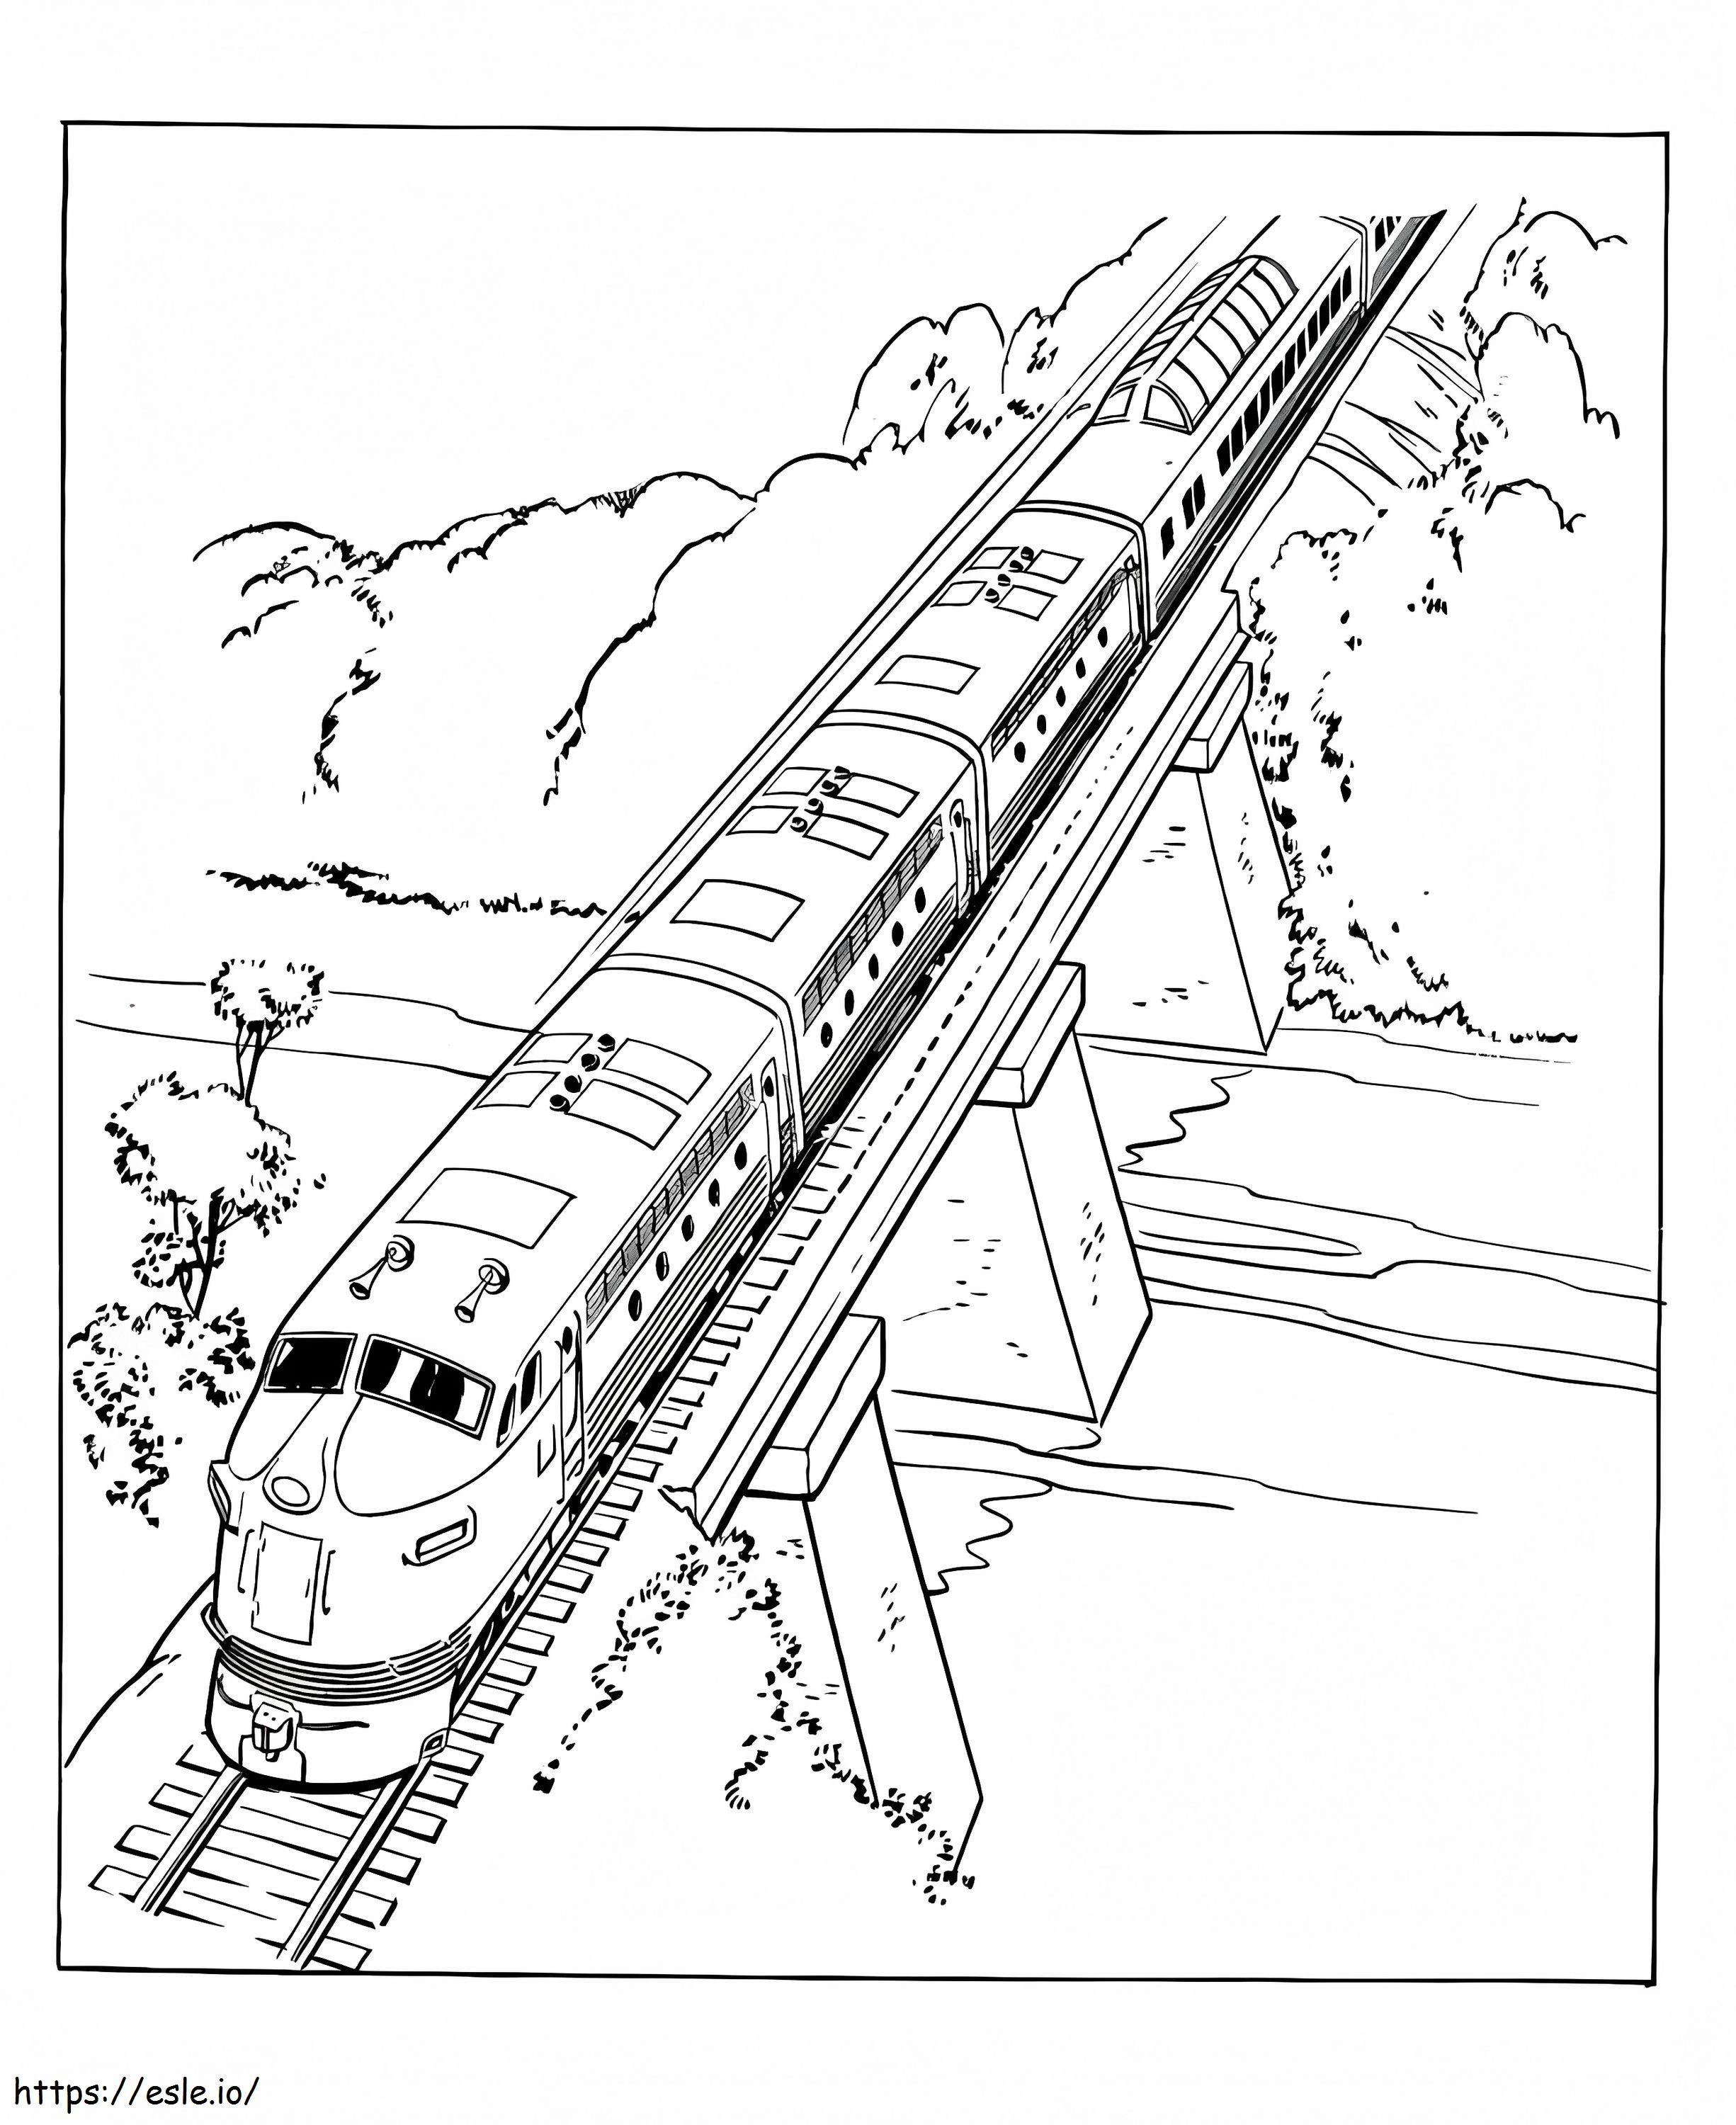 Train On The Bridge 1 coloring page